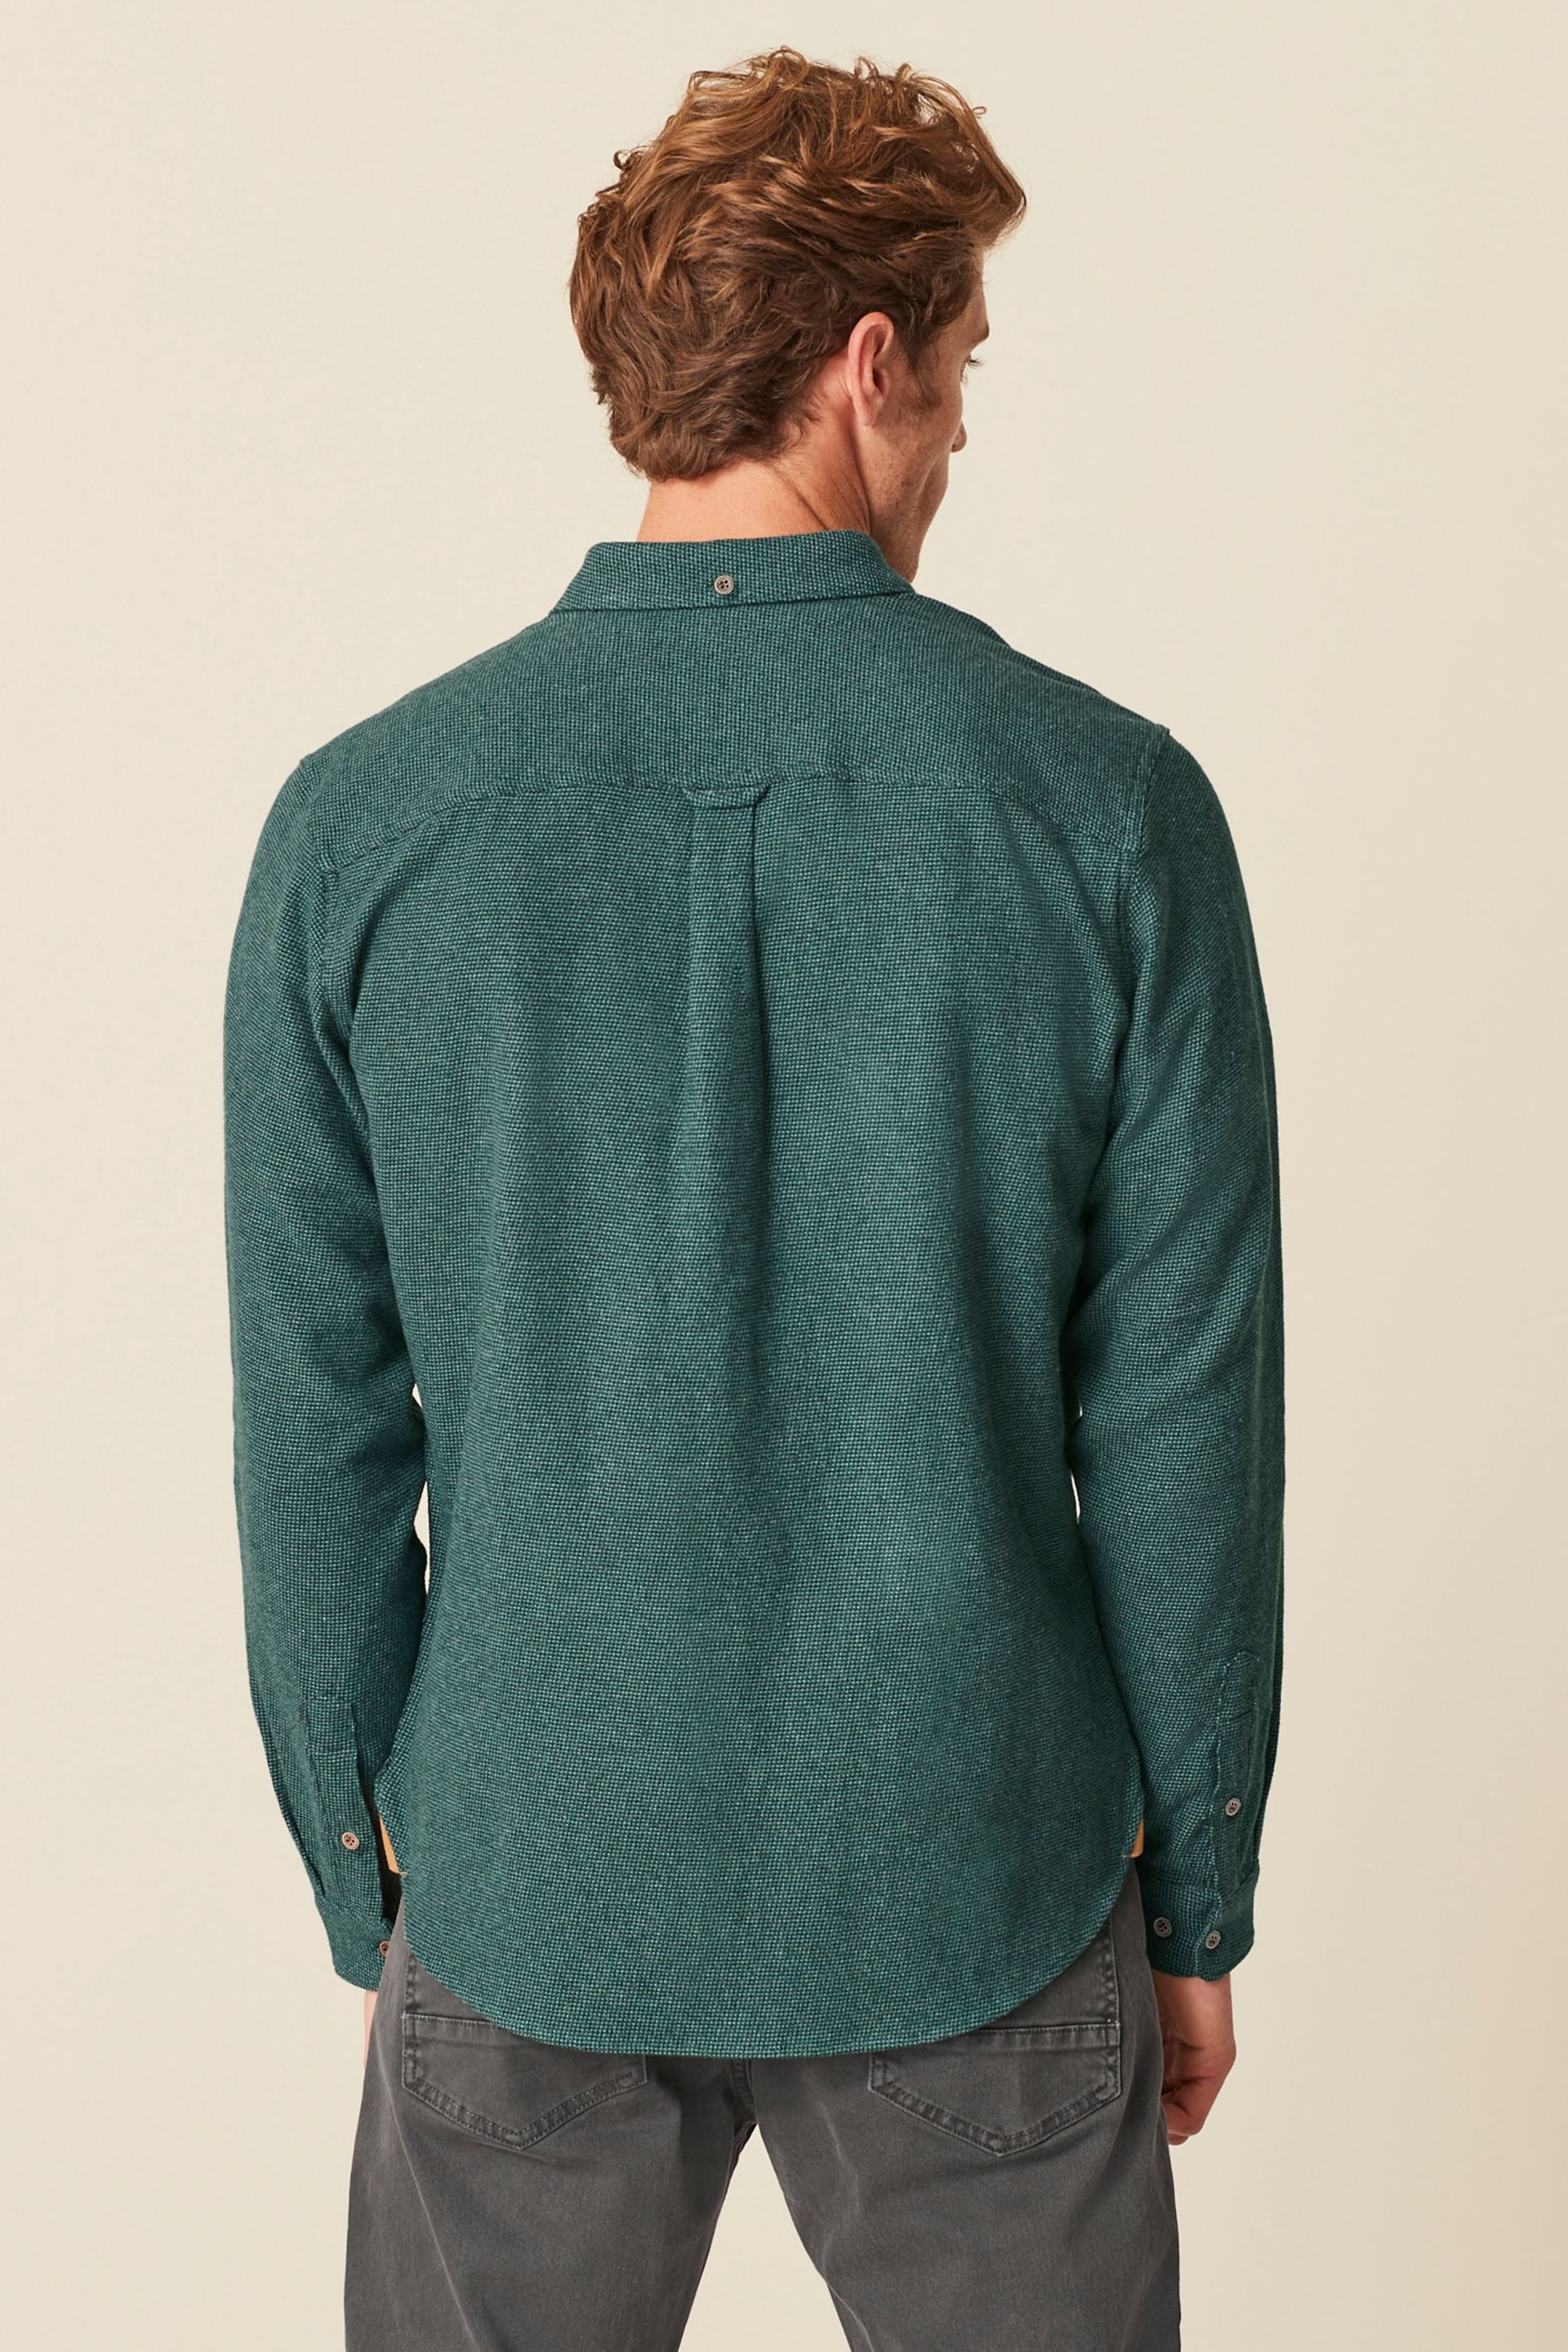 Green Brushed Texture 100% Cotton Long Sleeve Shirt - Image 3 of 9